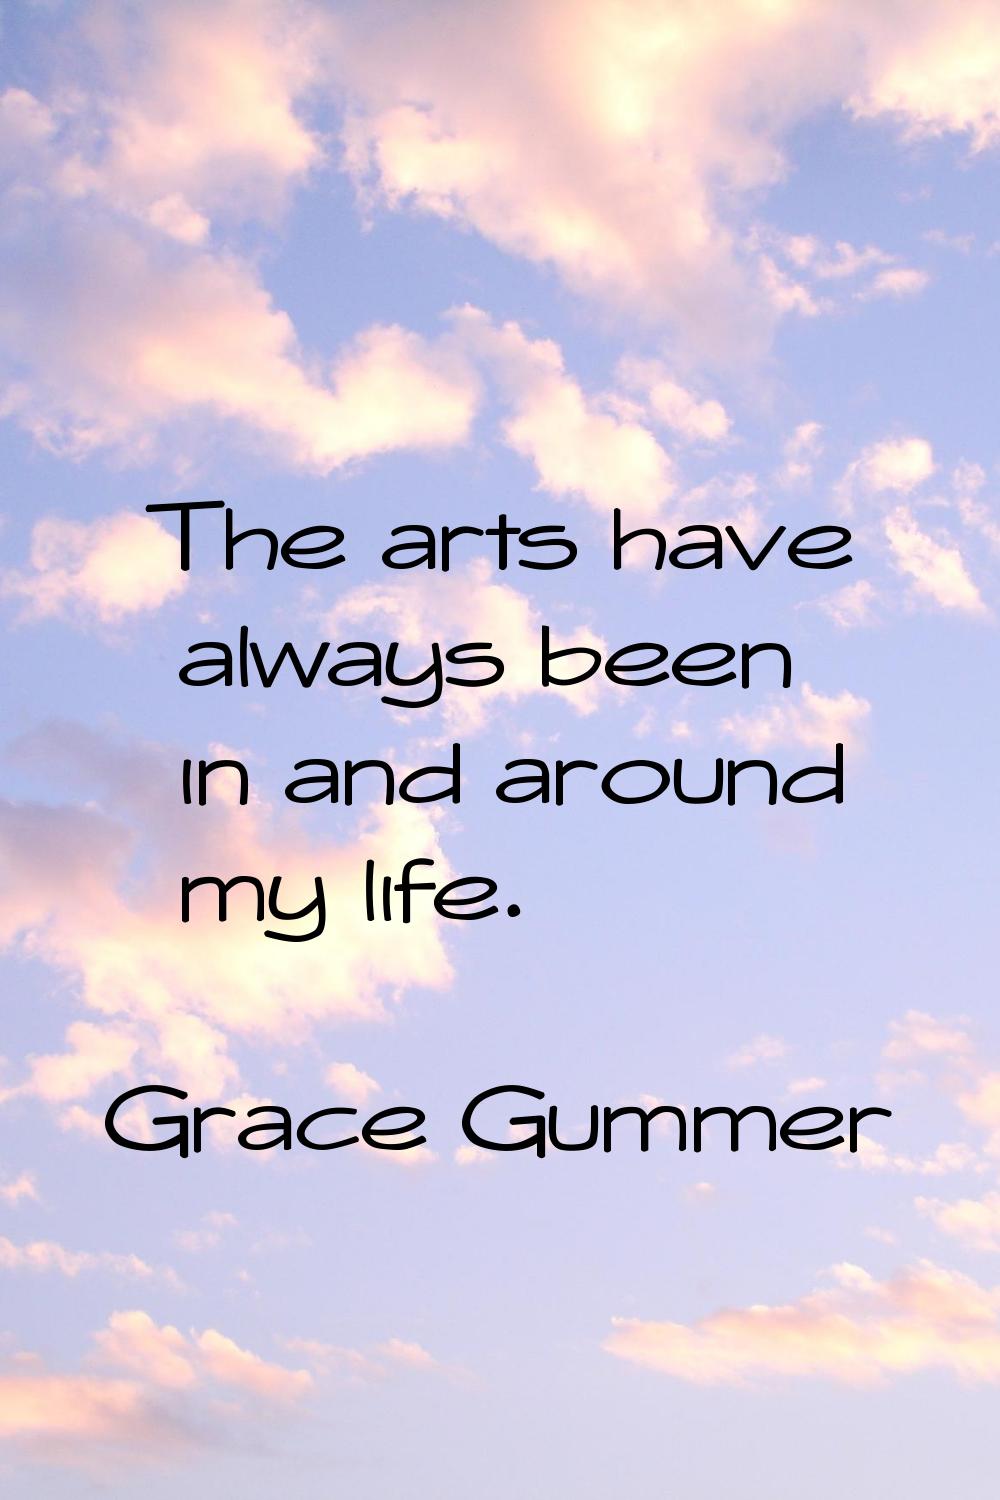 The arts have always been in and around my life.